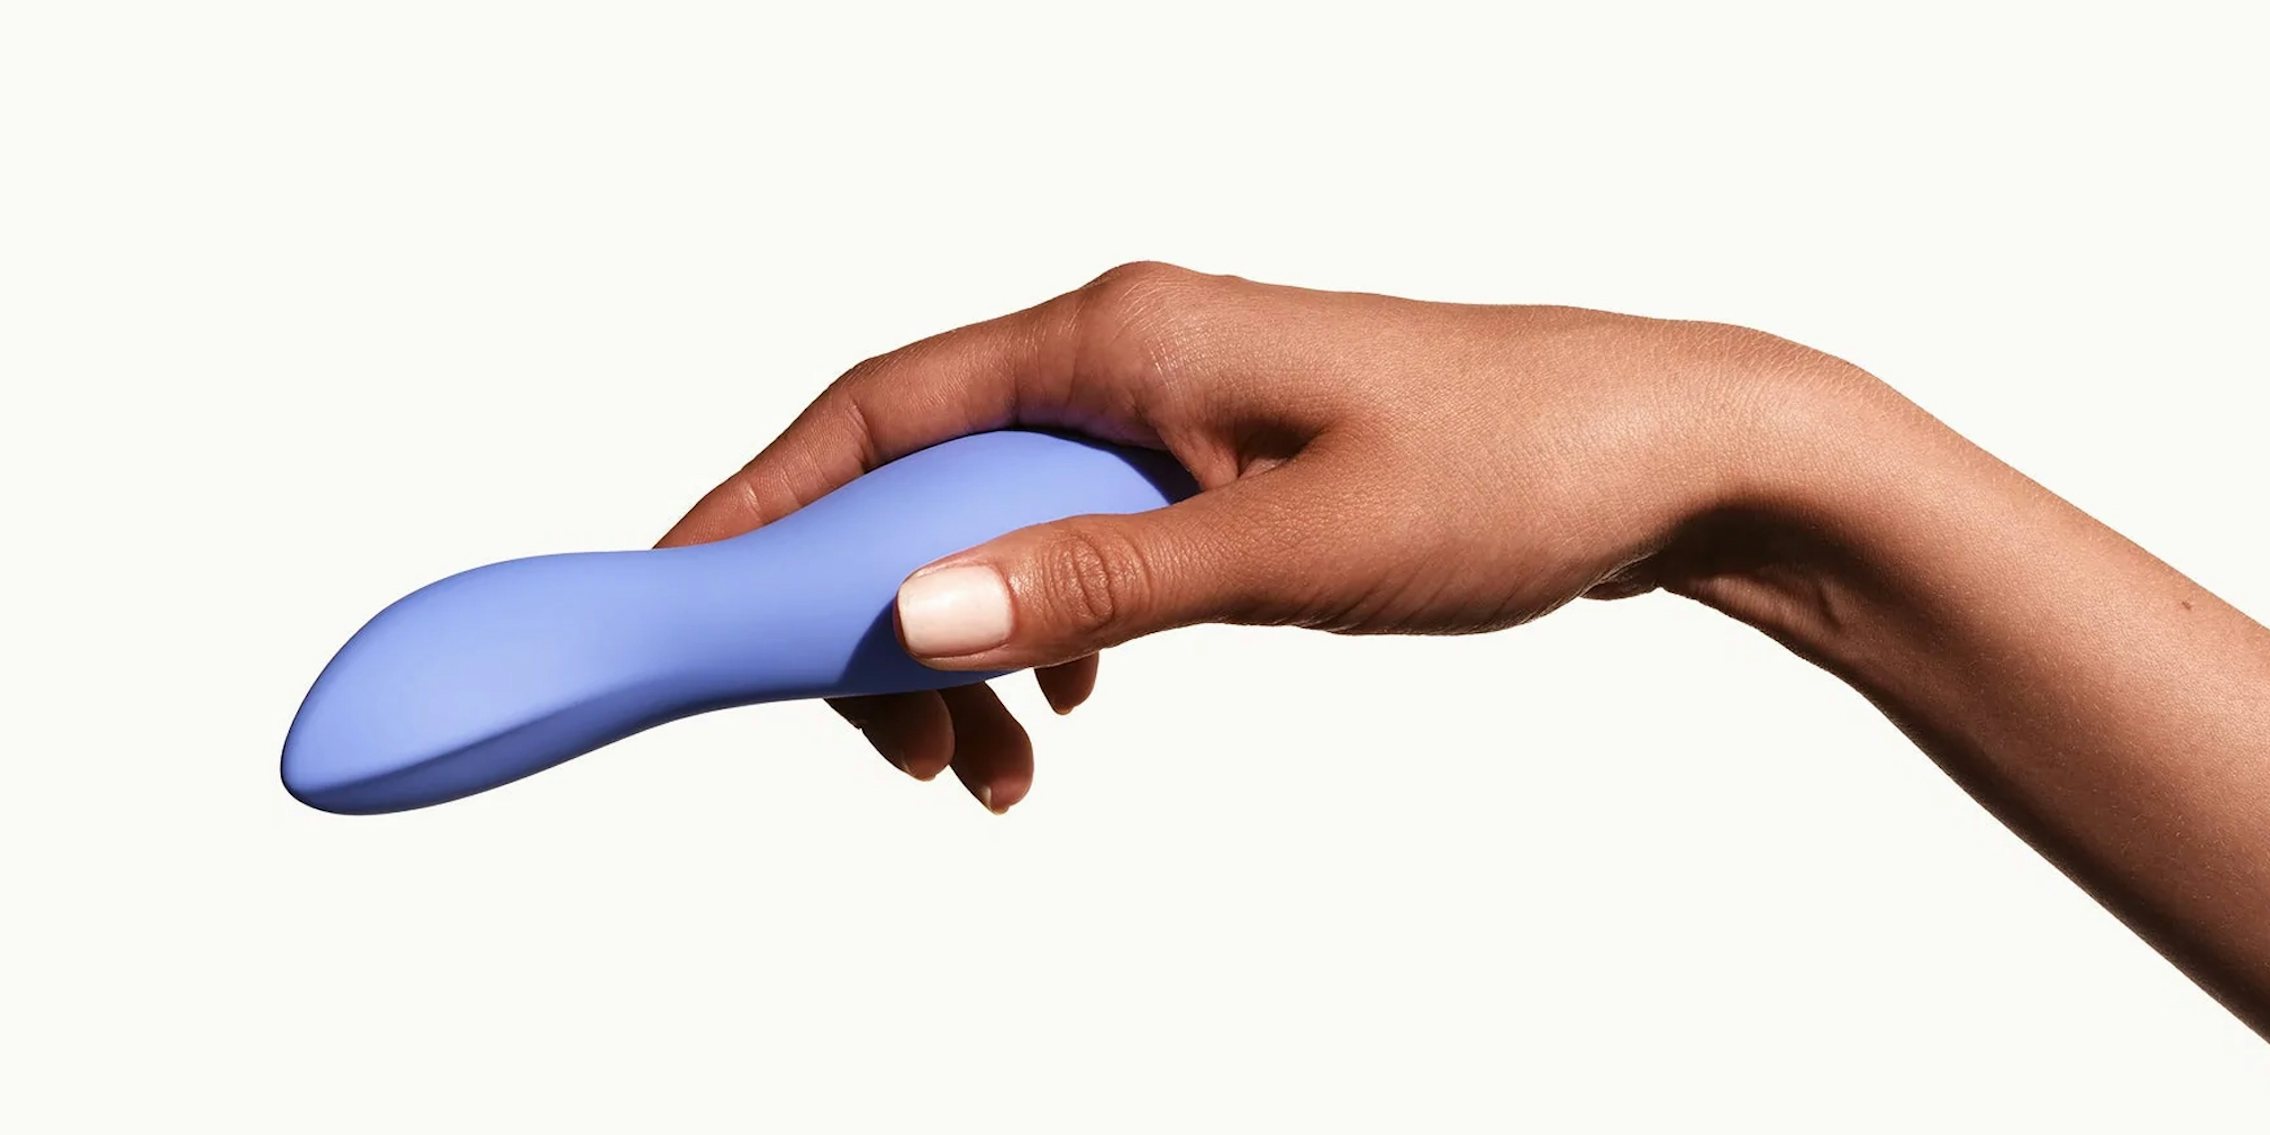 A hand holding a periwinkle Dame Dip vibrator against a beige background.